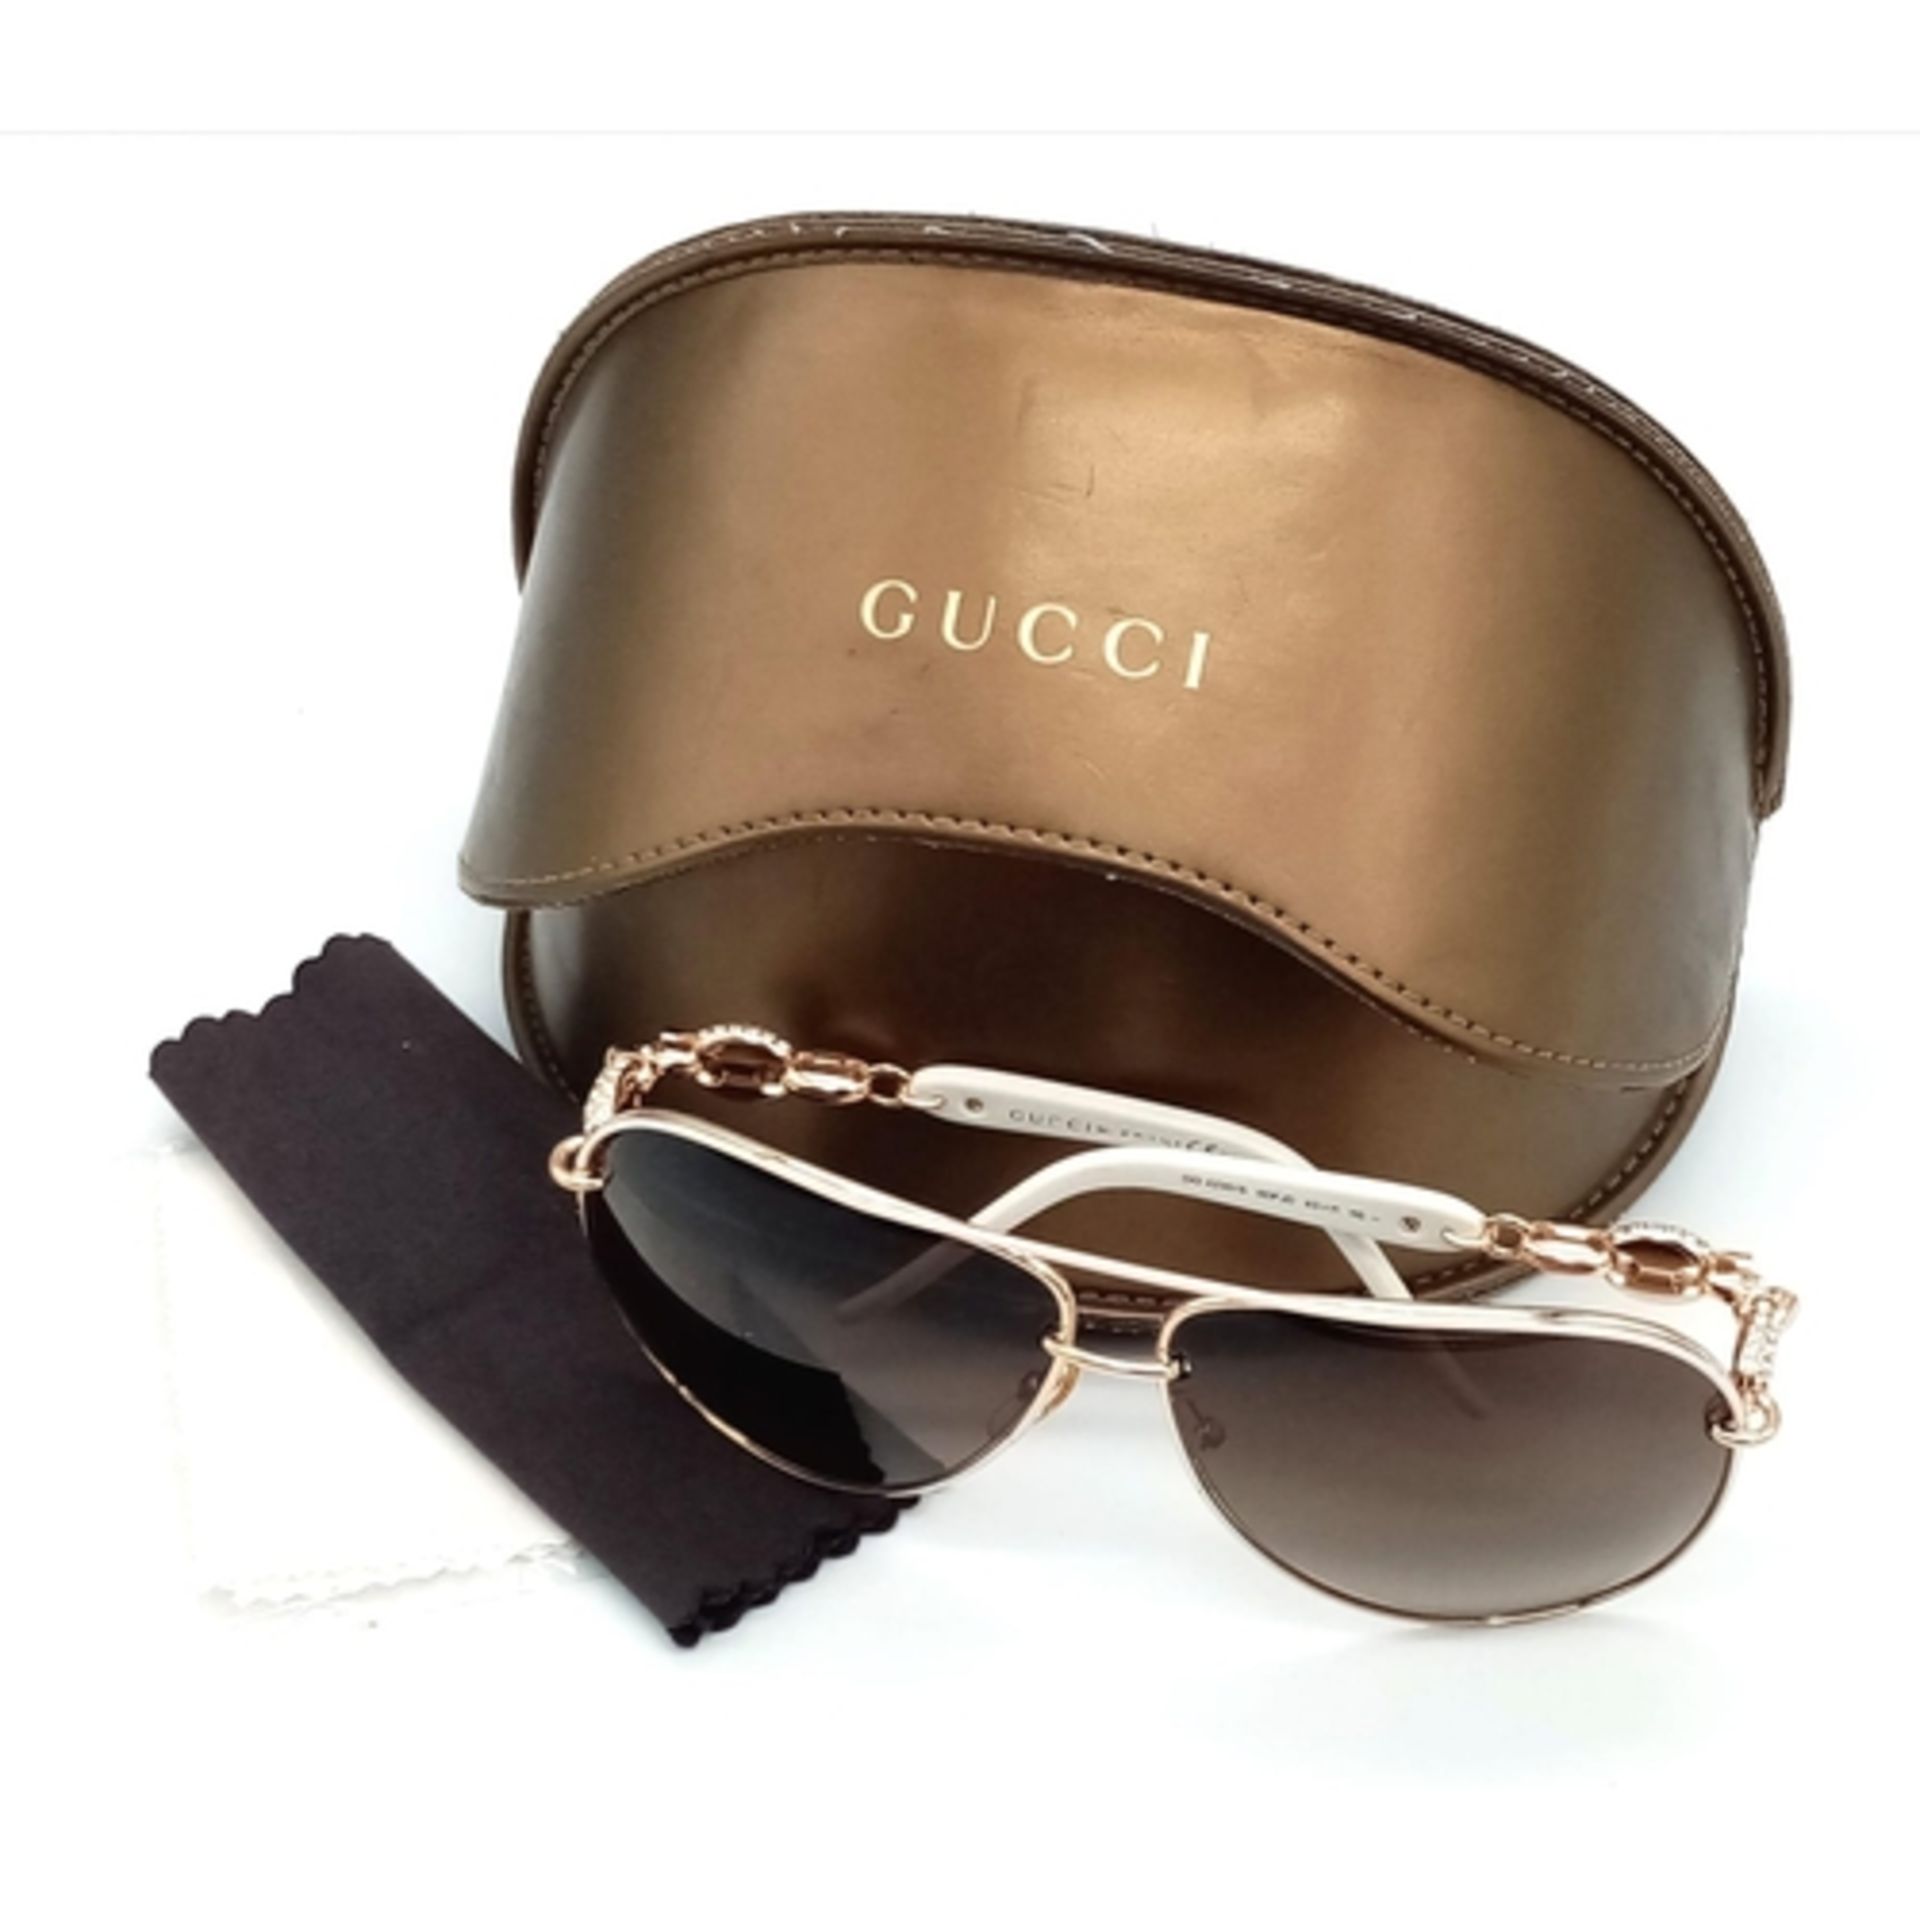 A Pair of Gucci Ladies Sunglasses and Gucci Case. Ref: 12751. Missing a nose pad.